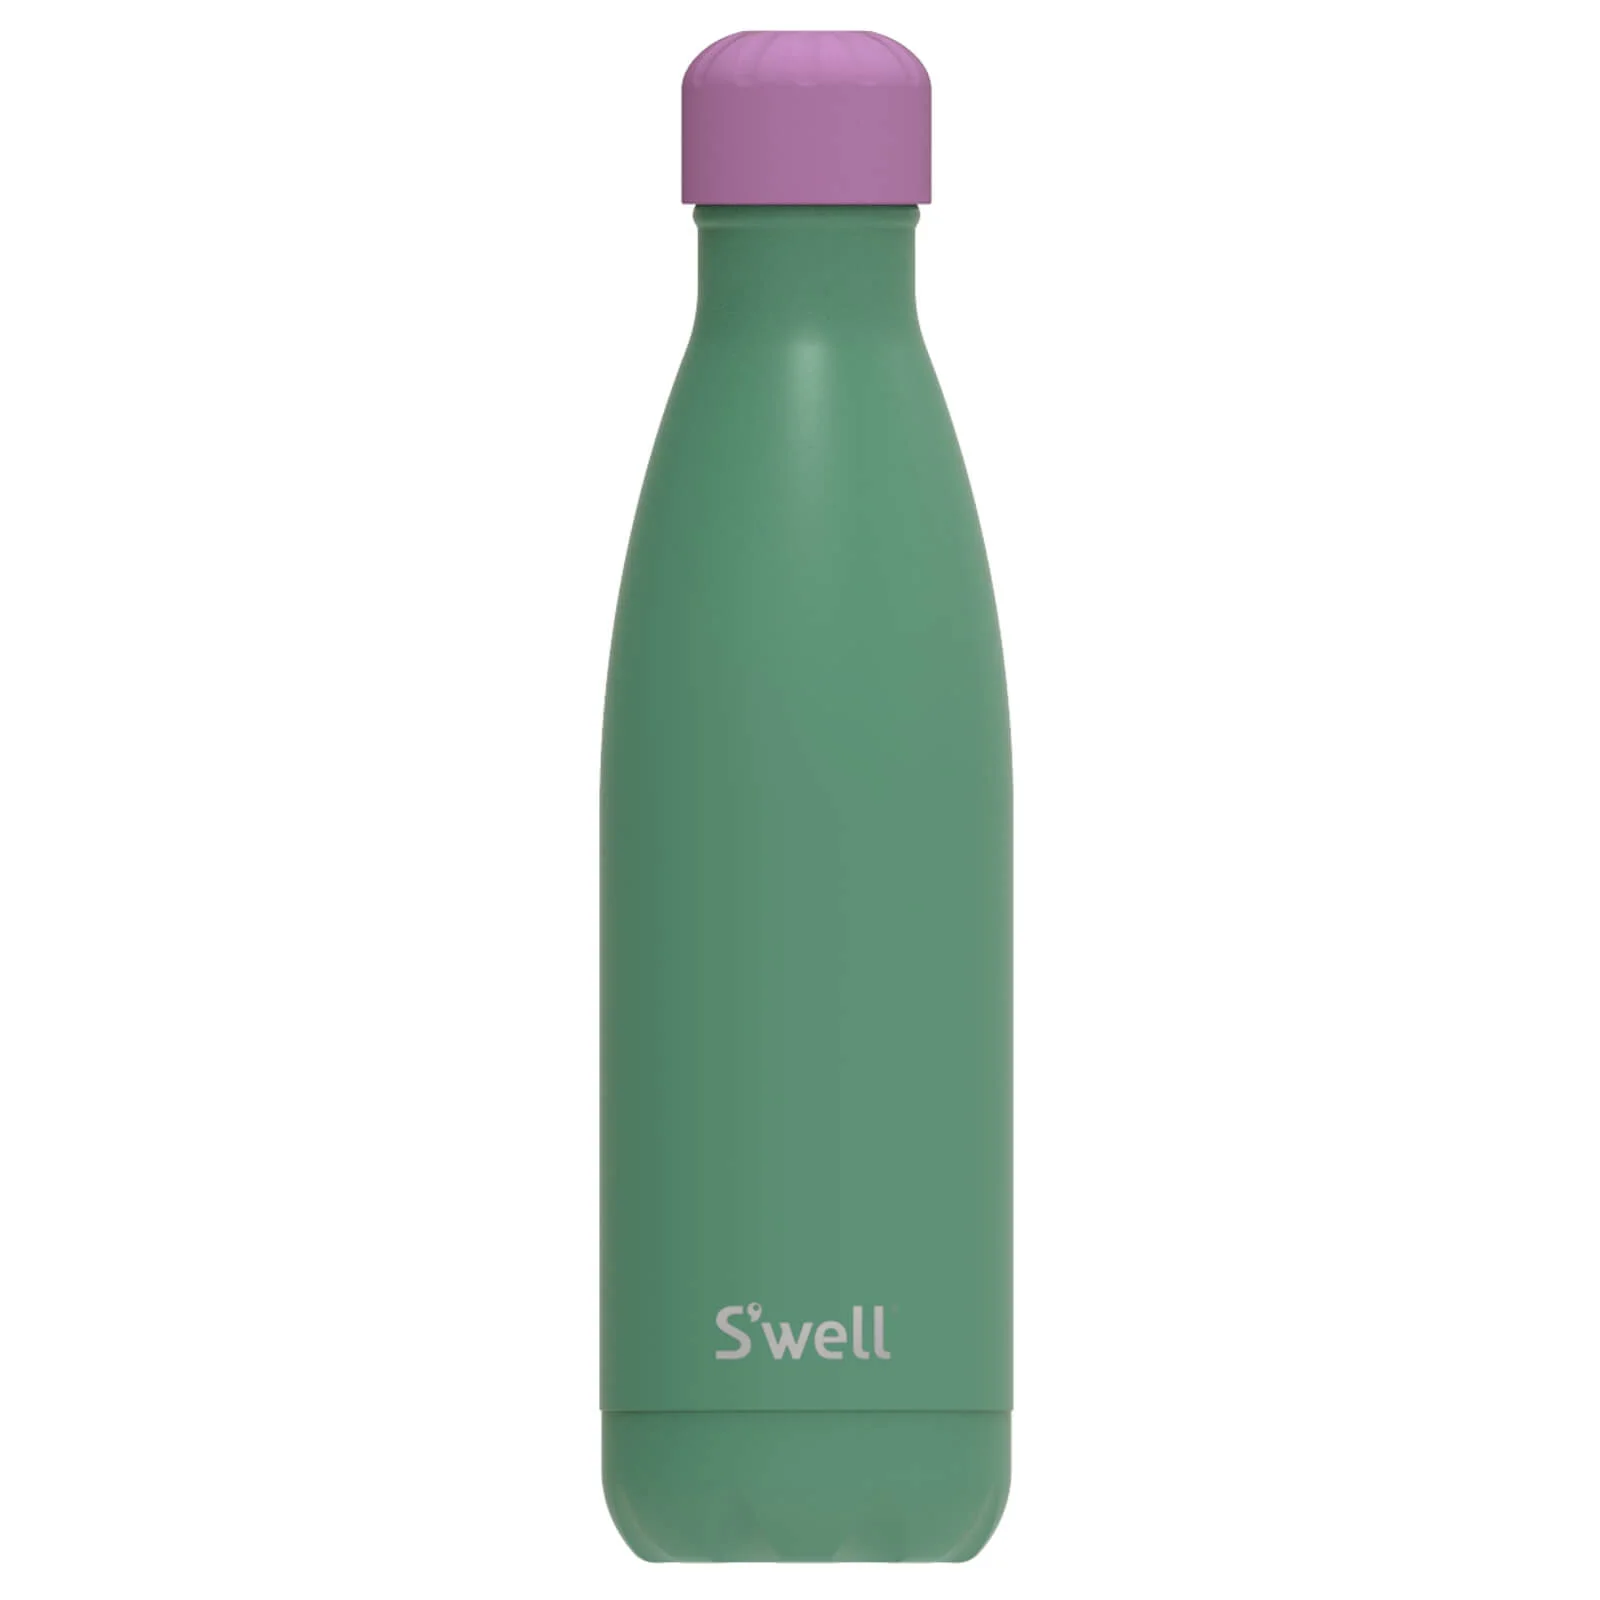 S'well Love You So Matcha Water Bottle - 500ml Image 1